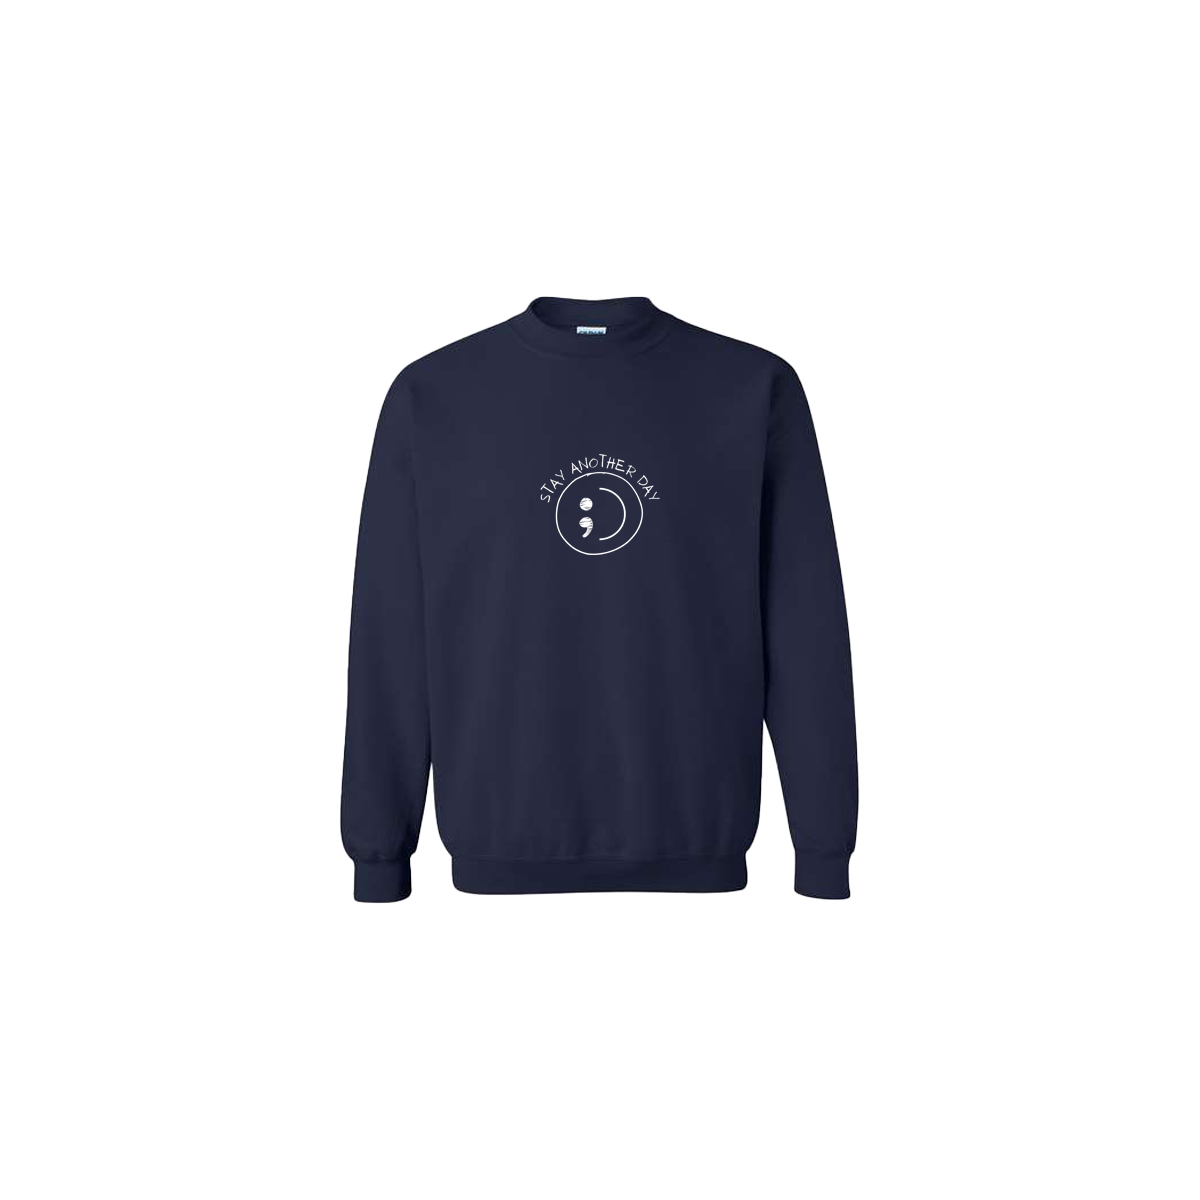 Stay Another Day Smiley Face Embroidered Navy Blue Crewneck - Mental Health Awareness Clothing